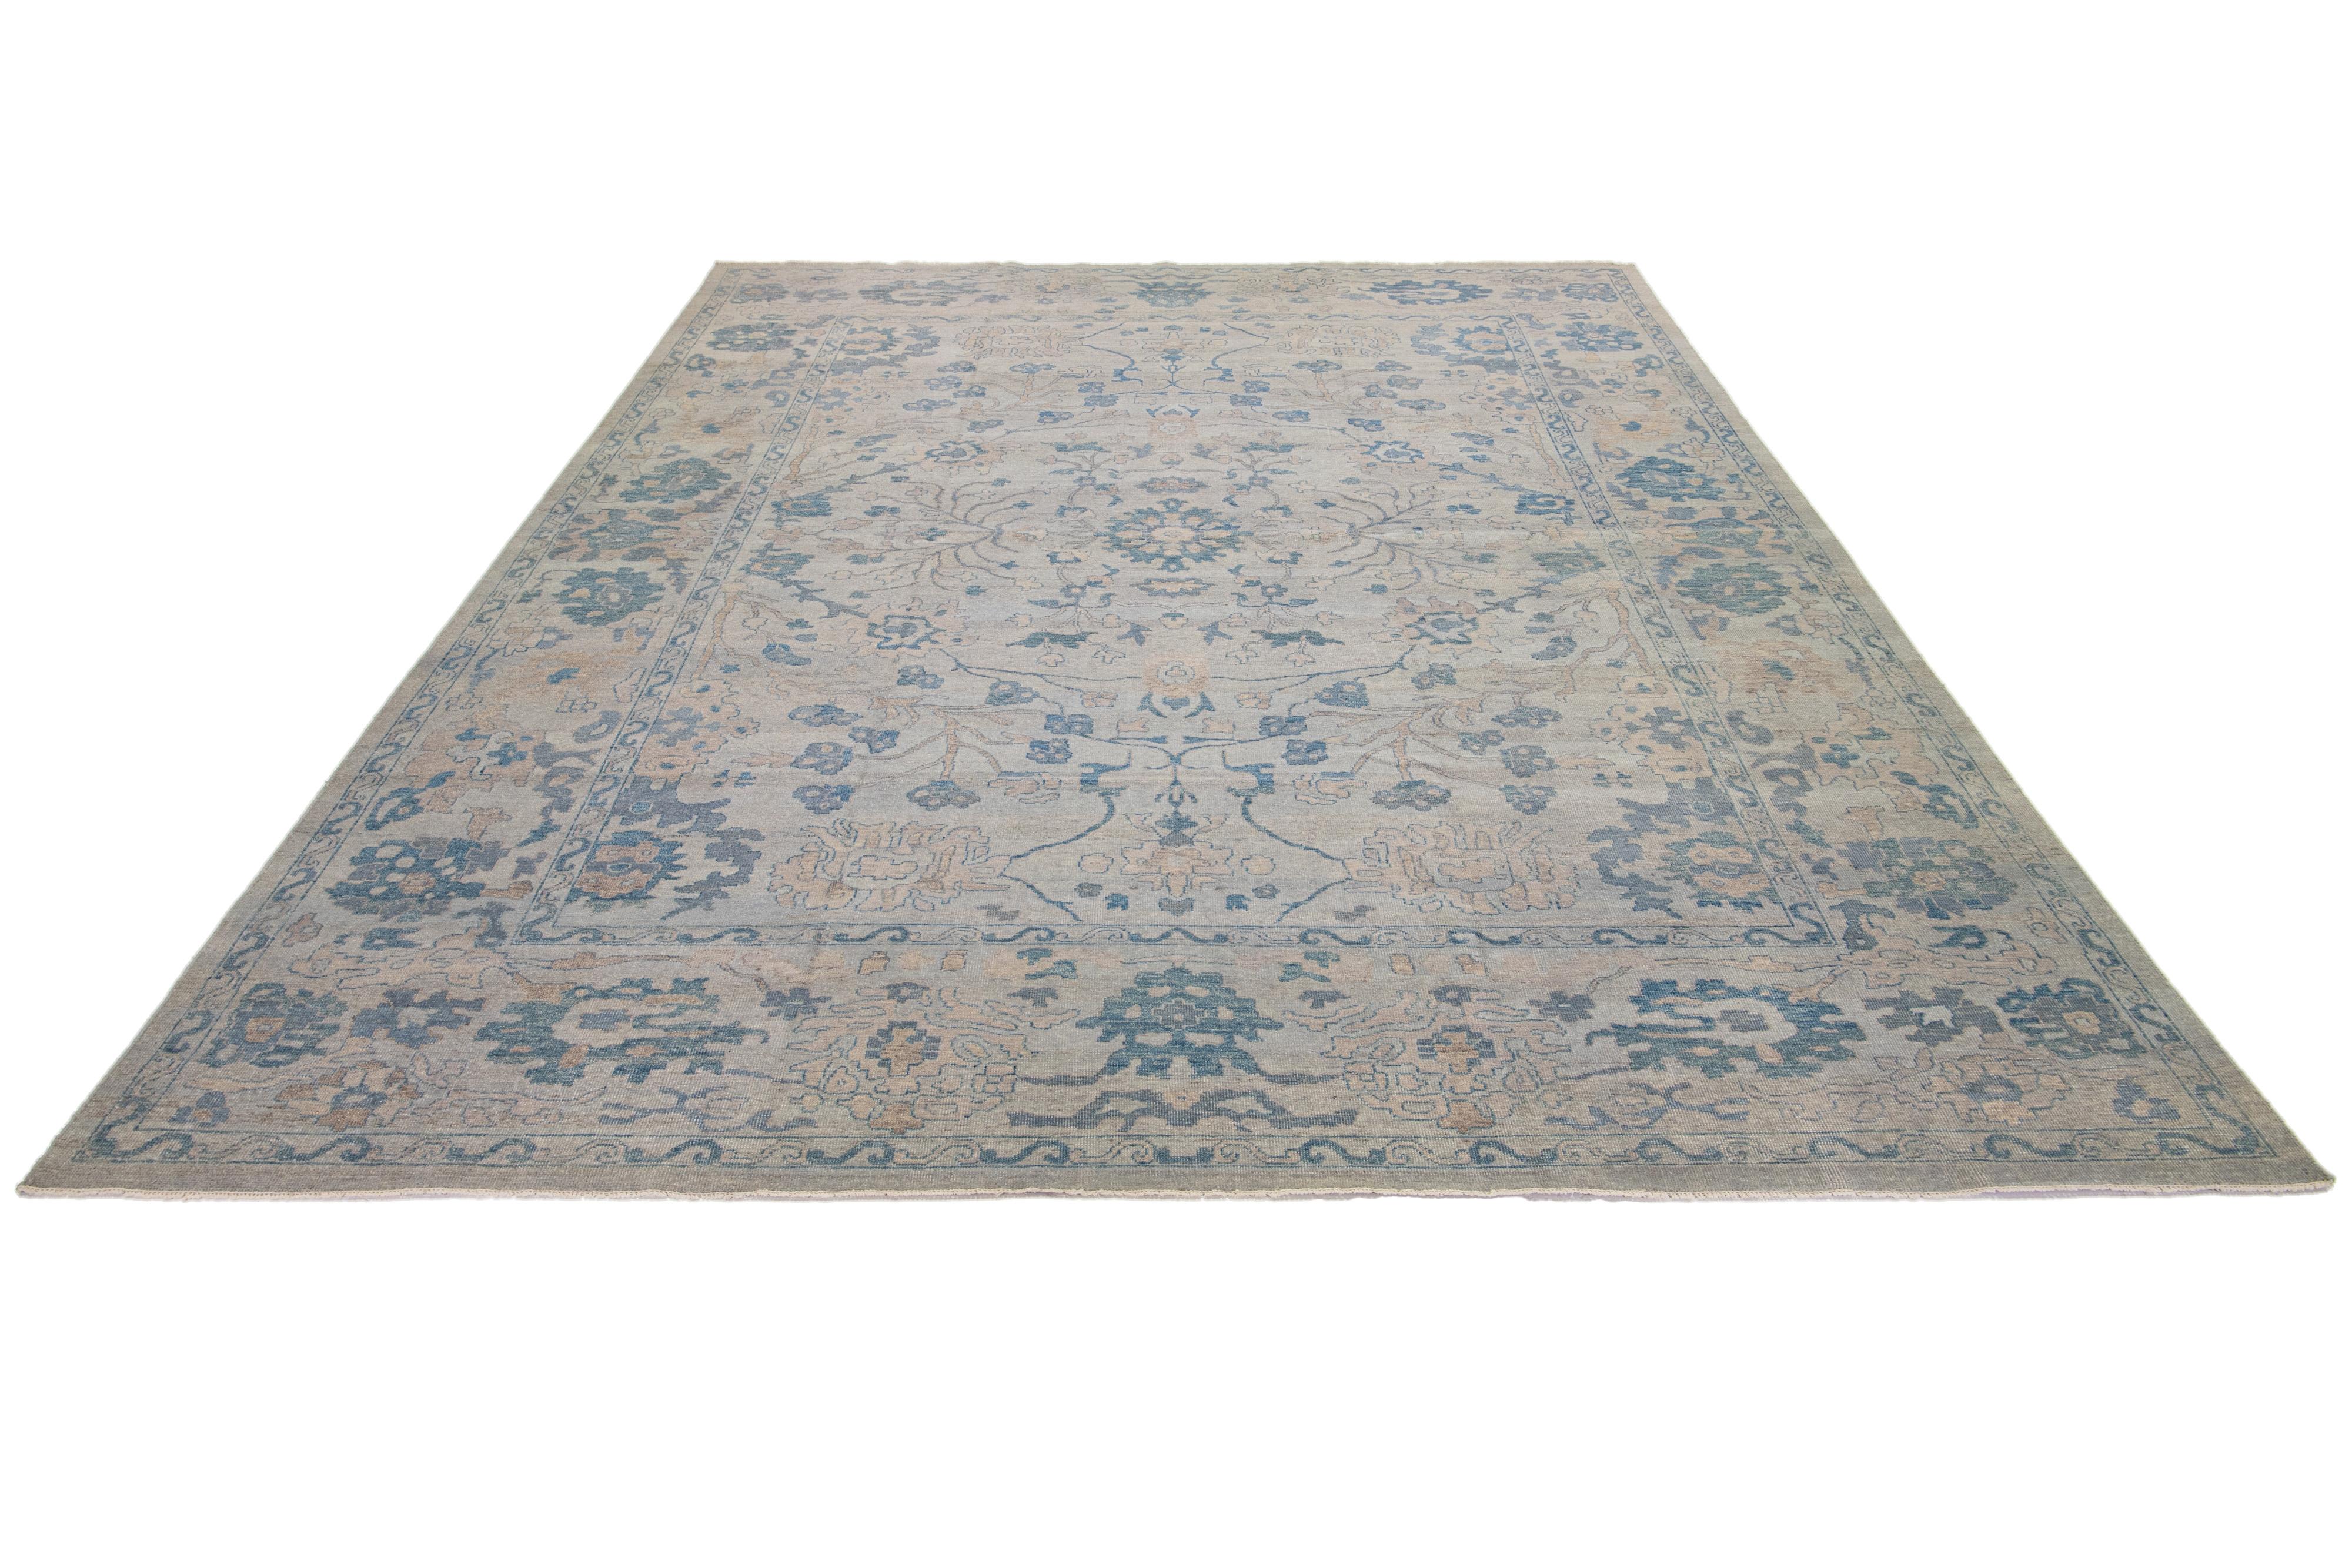 This Oushak rug is hand-knotted with a gray field. This mid-century modern-style rug has an all-over blue and brown floral design. 

This rug measures 11'10